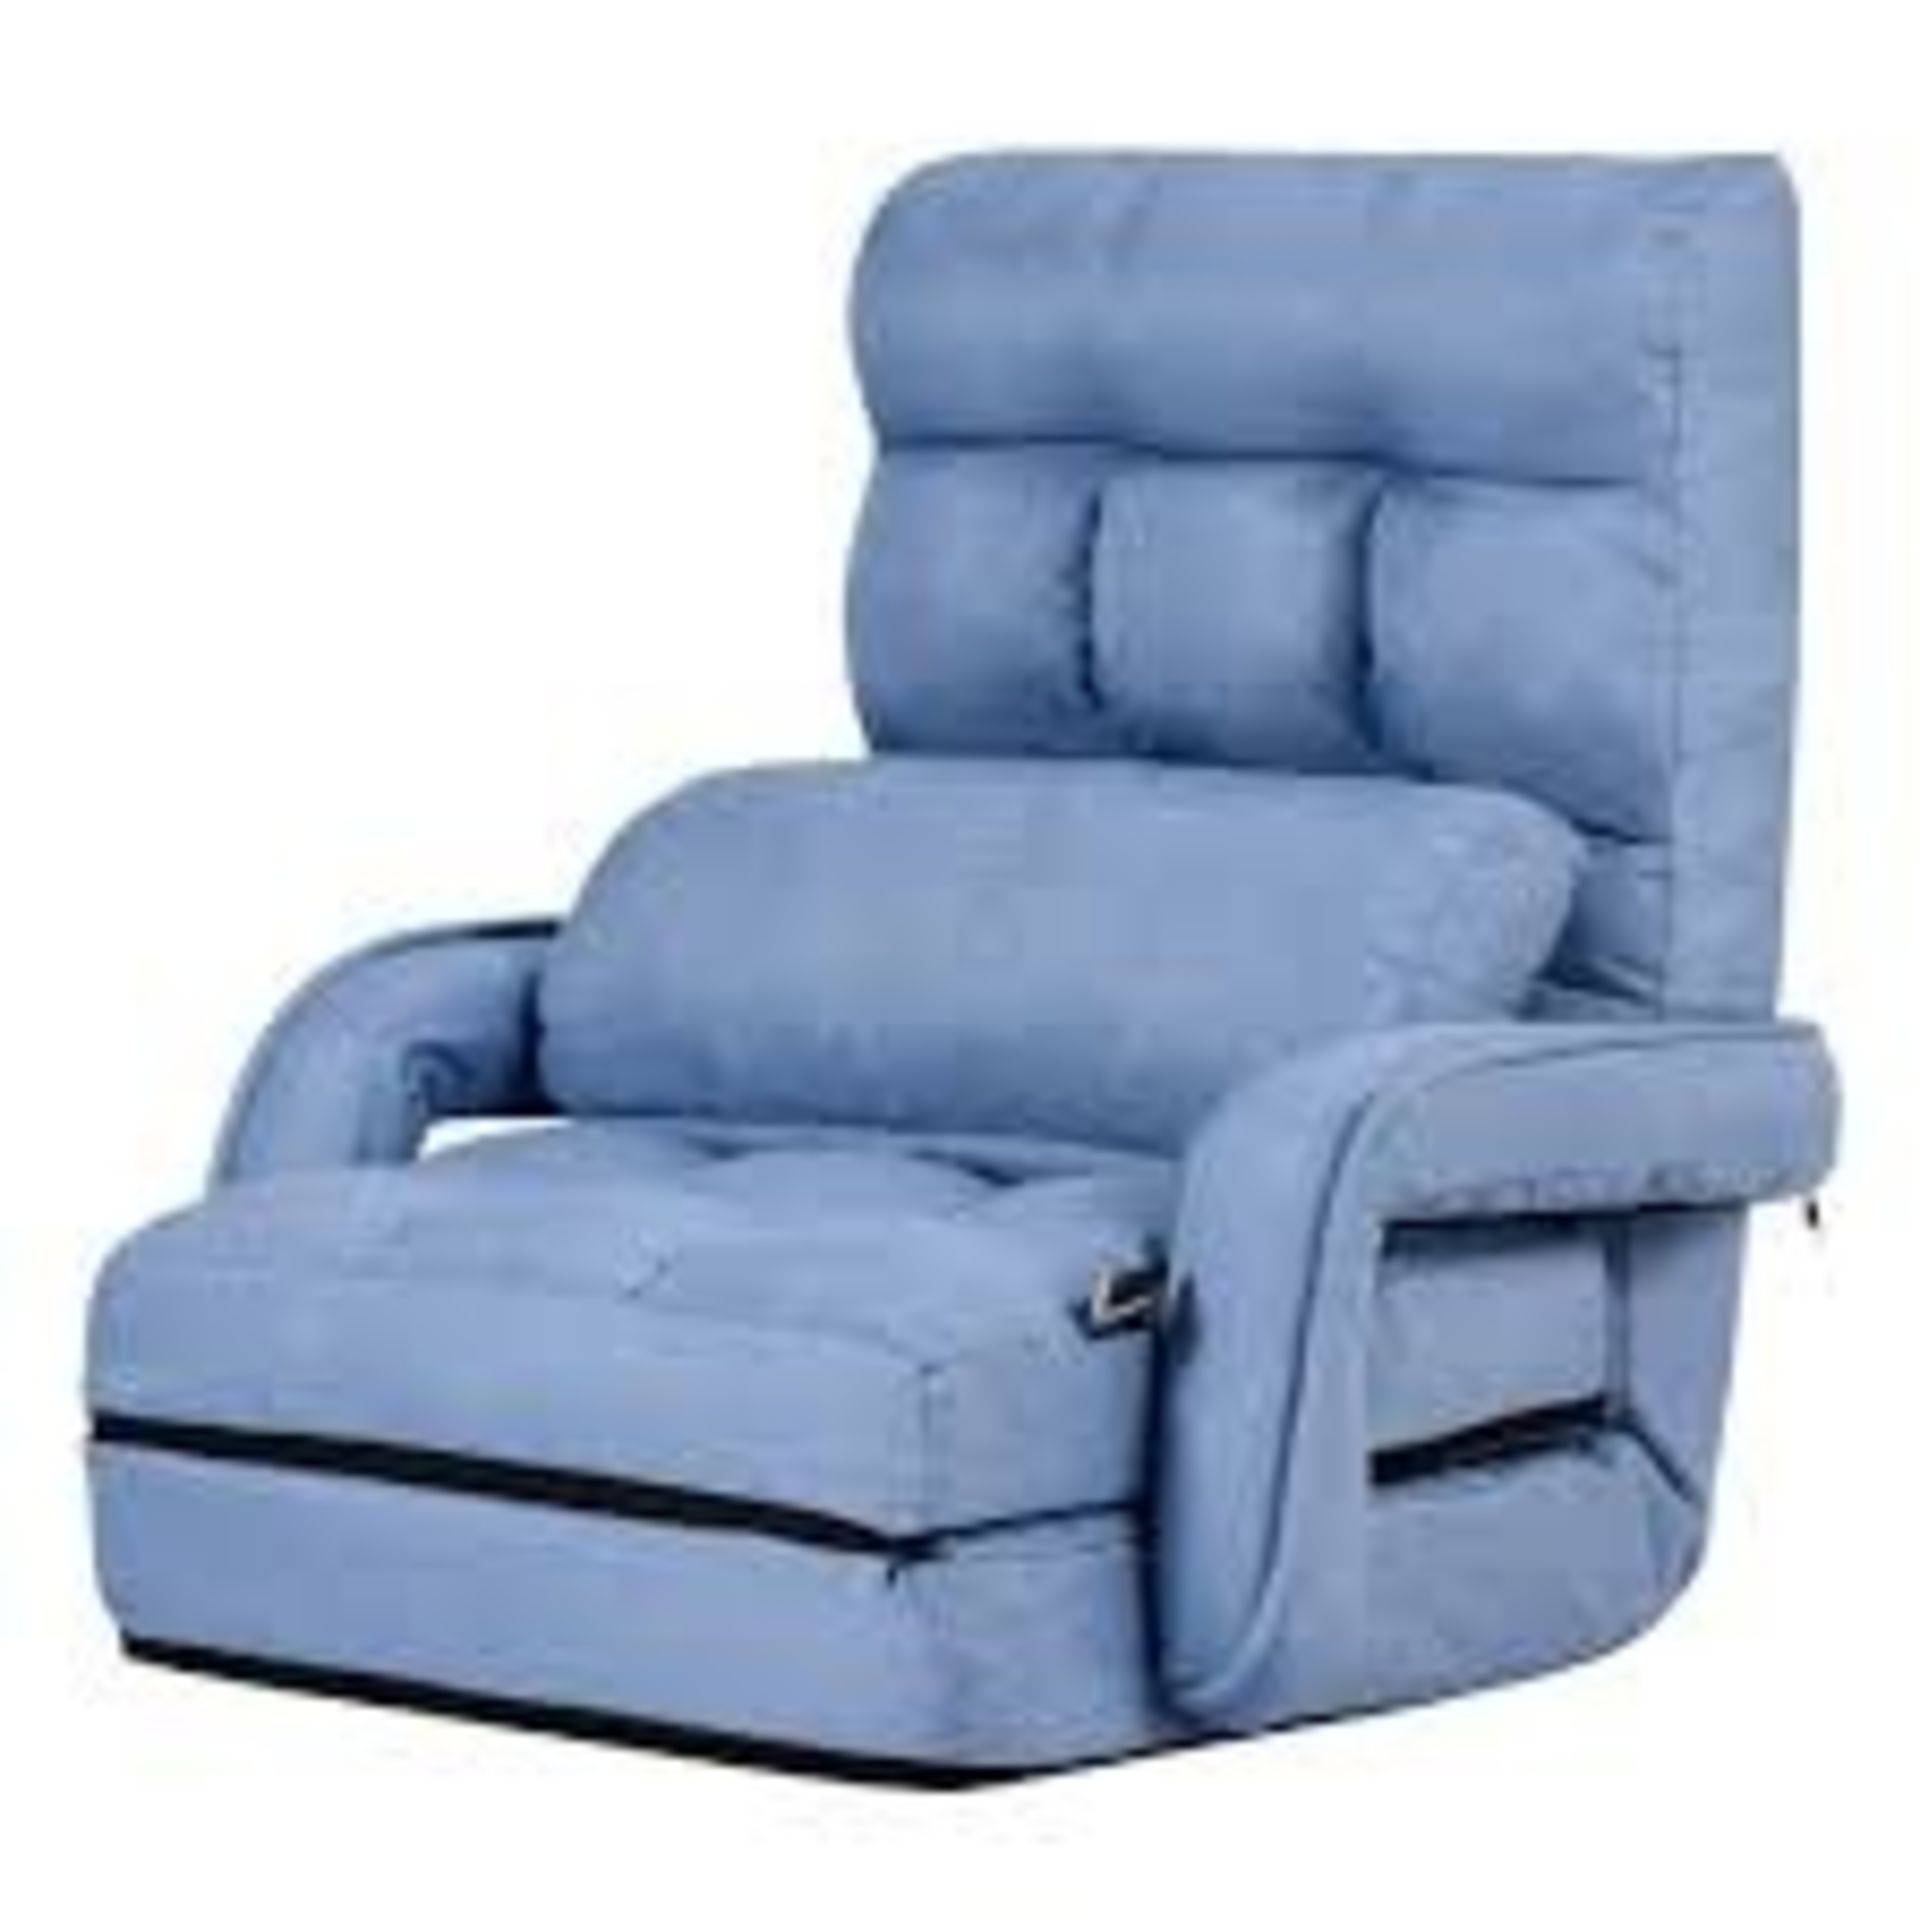 Adjustable Folding Floor Lazy Chair with Pillow-Blue - ER54